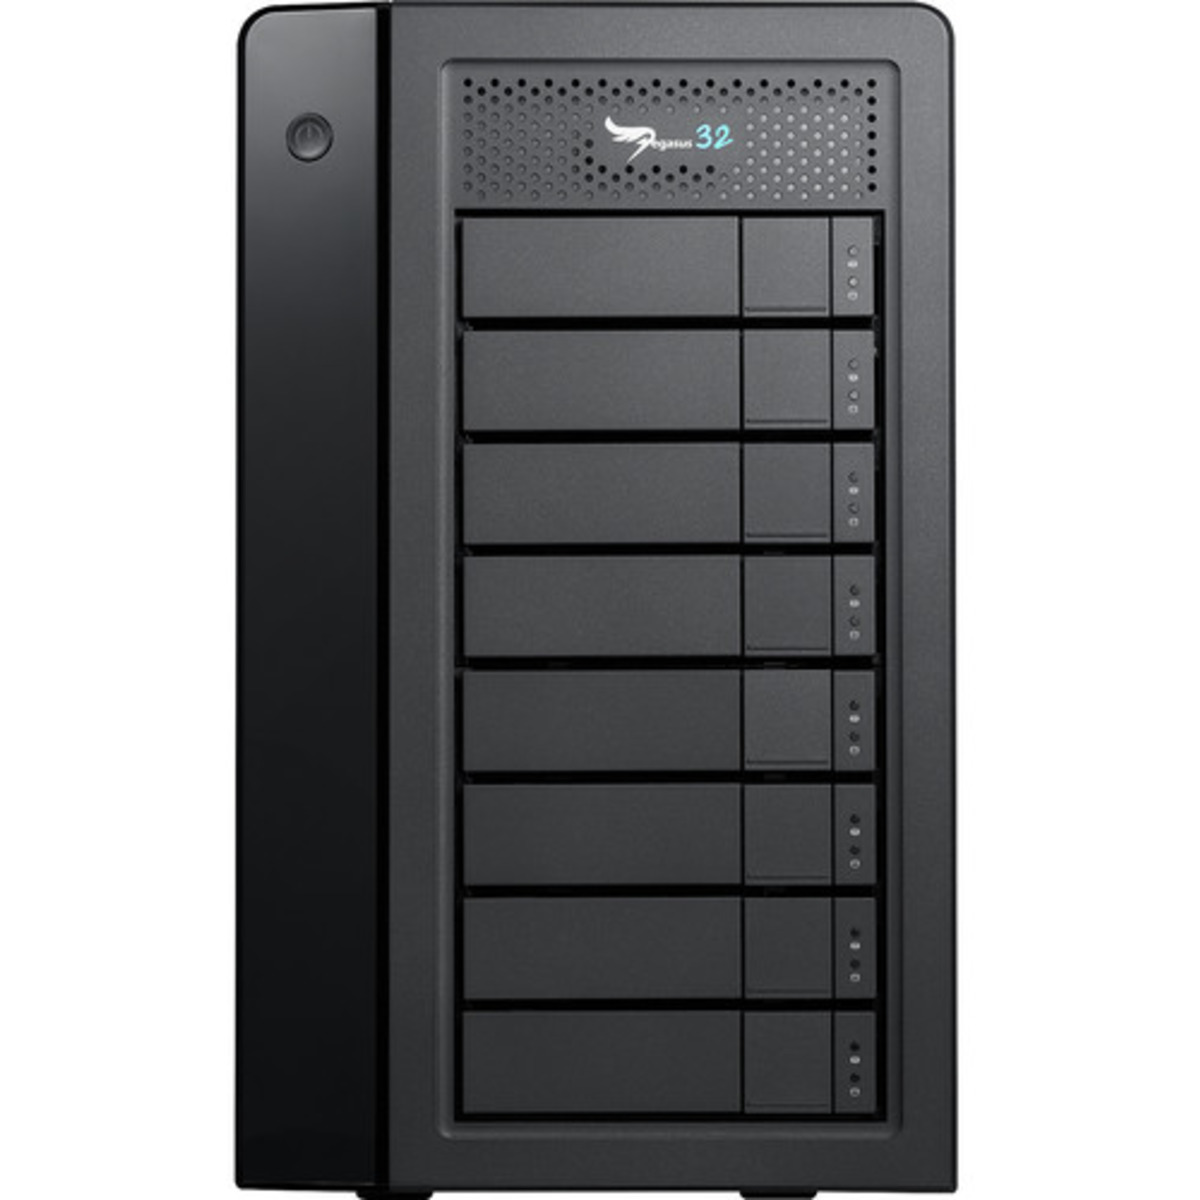 Promise Technology Pegasus32 R8 Thunderbolt 3 4tb 8-Bay Desktop Multimedia / Power User / Business DAS - Direct Attached Storage Device 8x500gb Crucial MX500 CT500MX500SSD1 2.5 560/510MB/s SATA 6Gb/s SSD CONSUMER Class Drives Installed - Burn-In Tested - ON SALE Pegasus32 R8 Thunderbolt 3